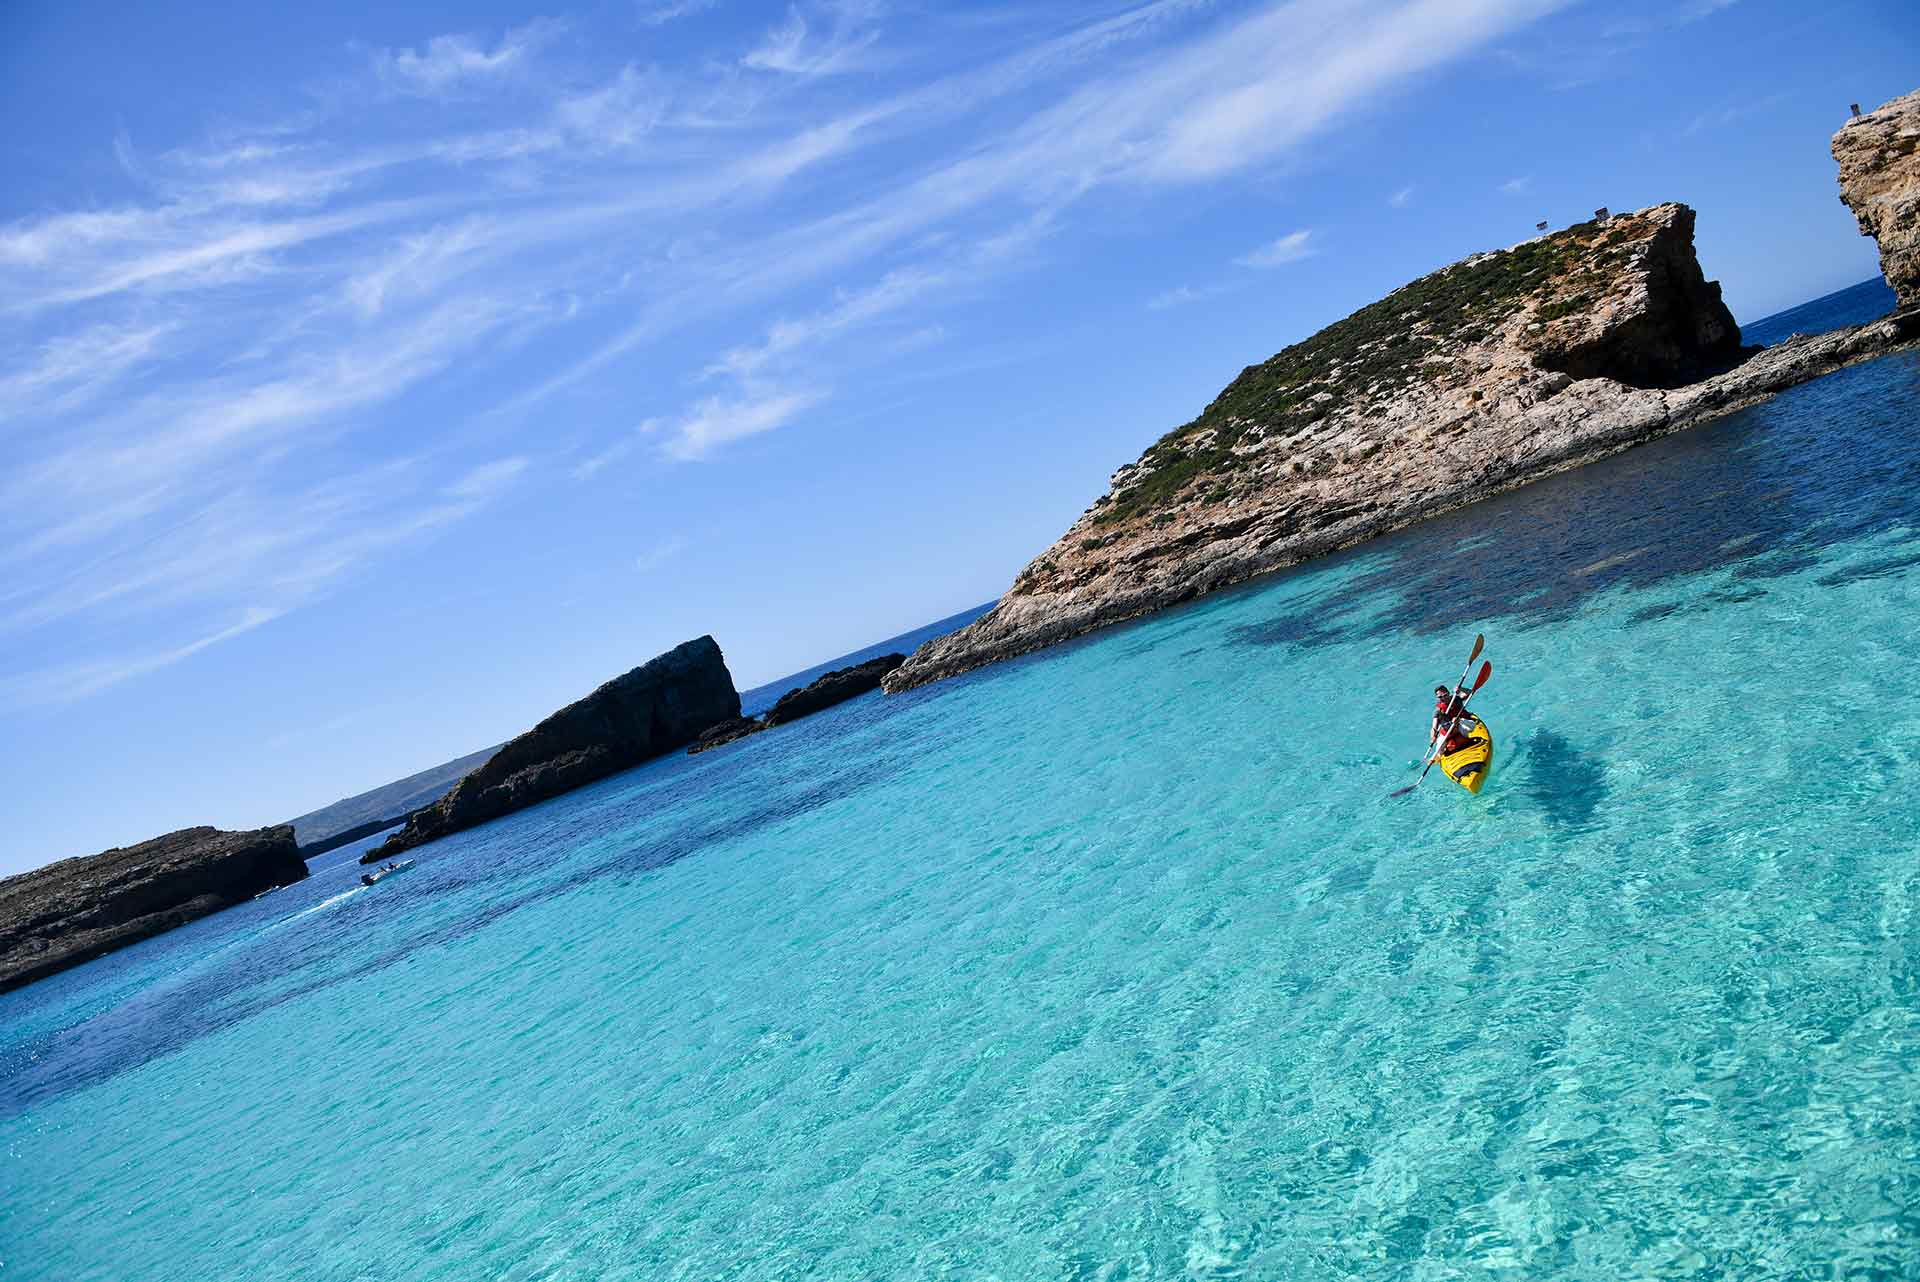 The island's crystal-clear waters make it ideal for a kayaking trip.